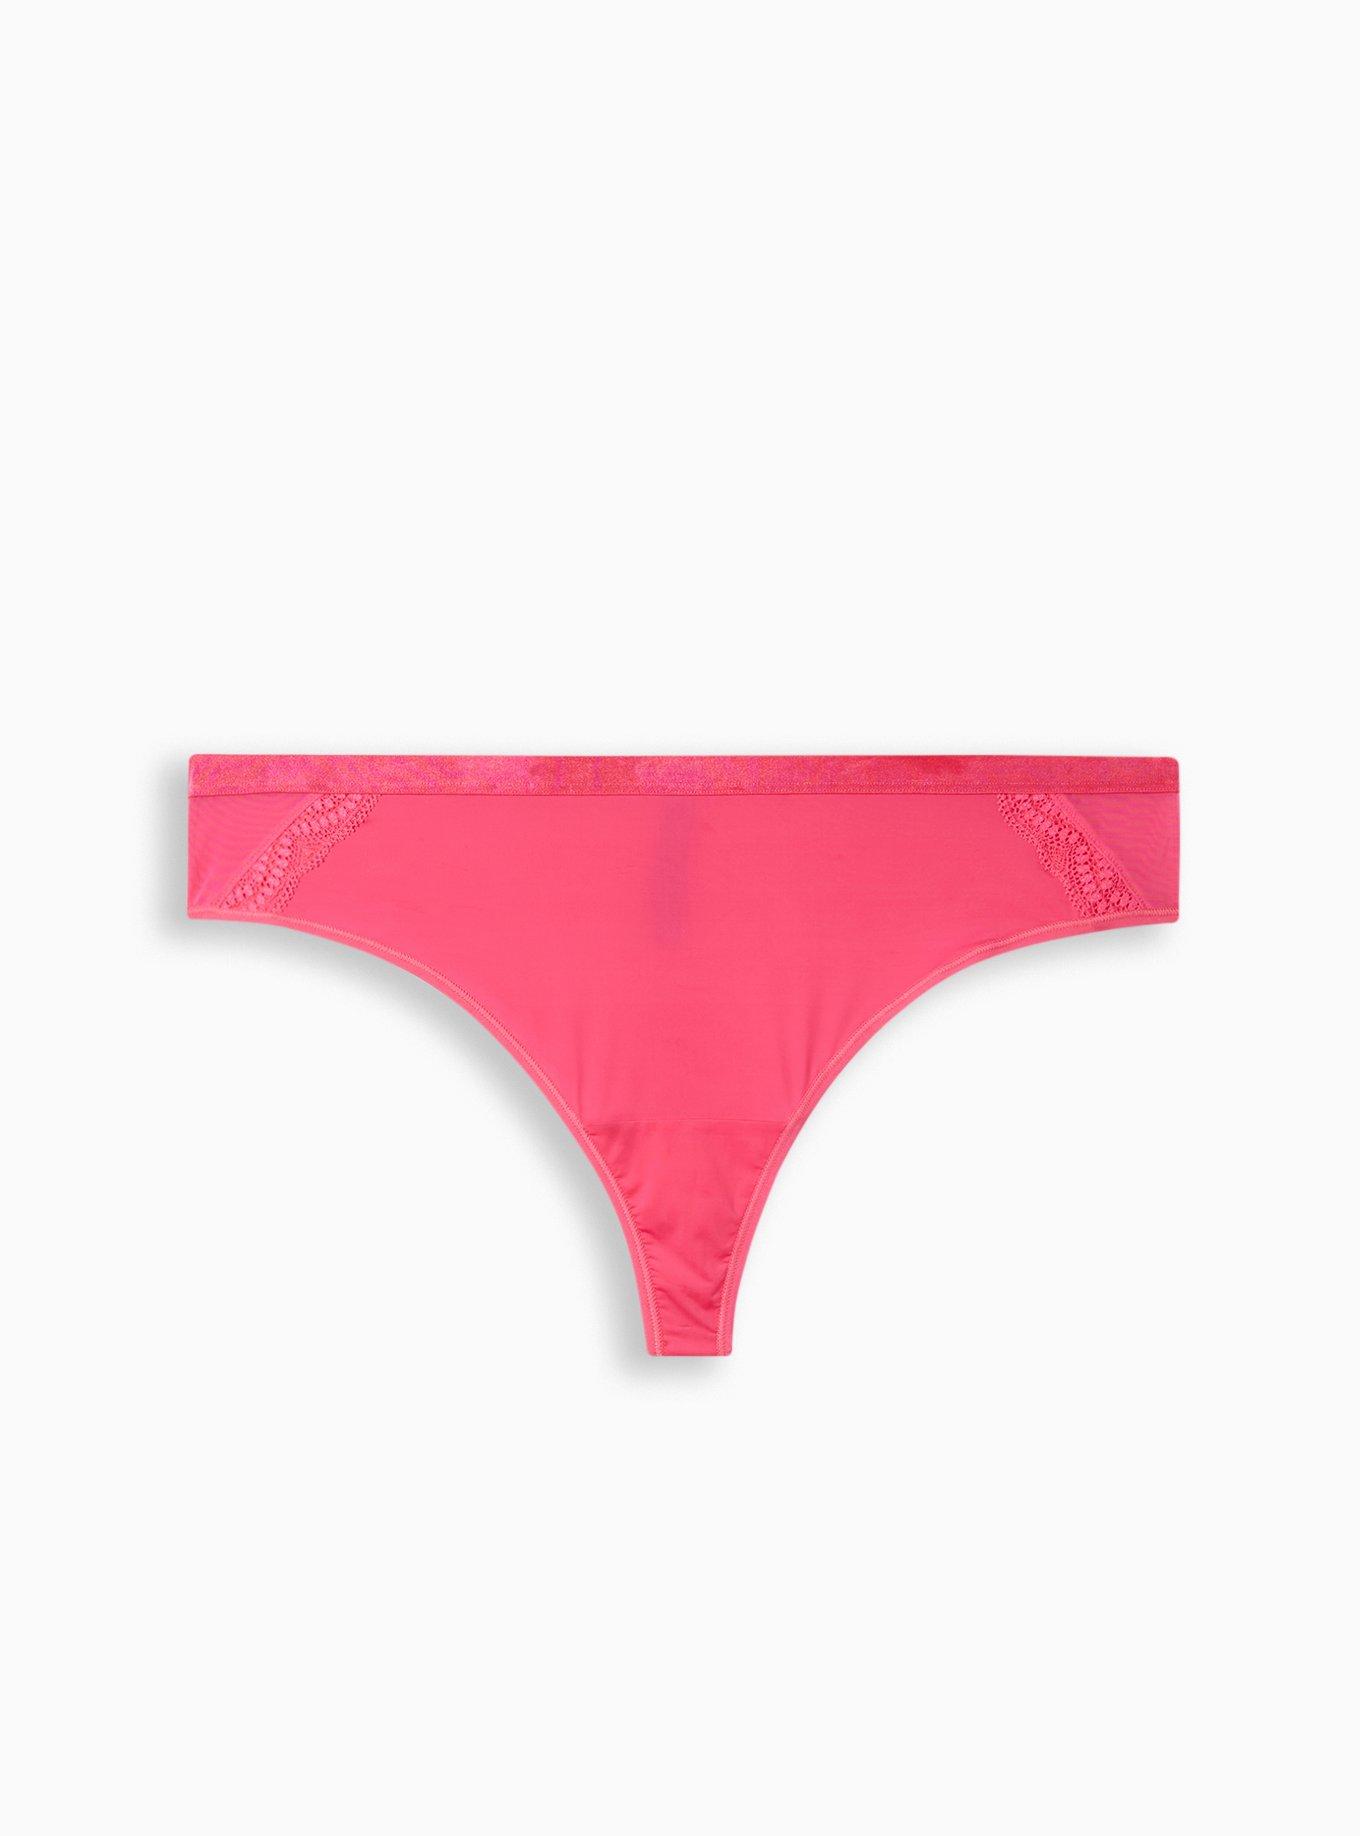 NWT VICTORIA'S SECRET PINK CHILLEST WRAPPER STRETCH SEAMLESS THONG PANTIES